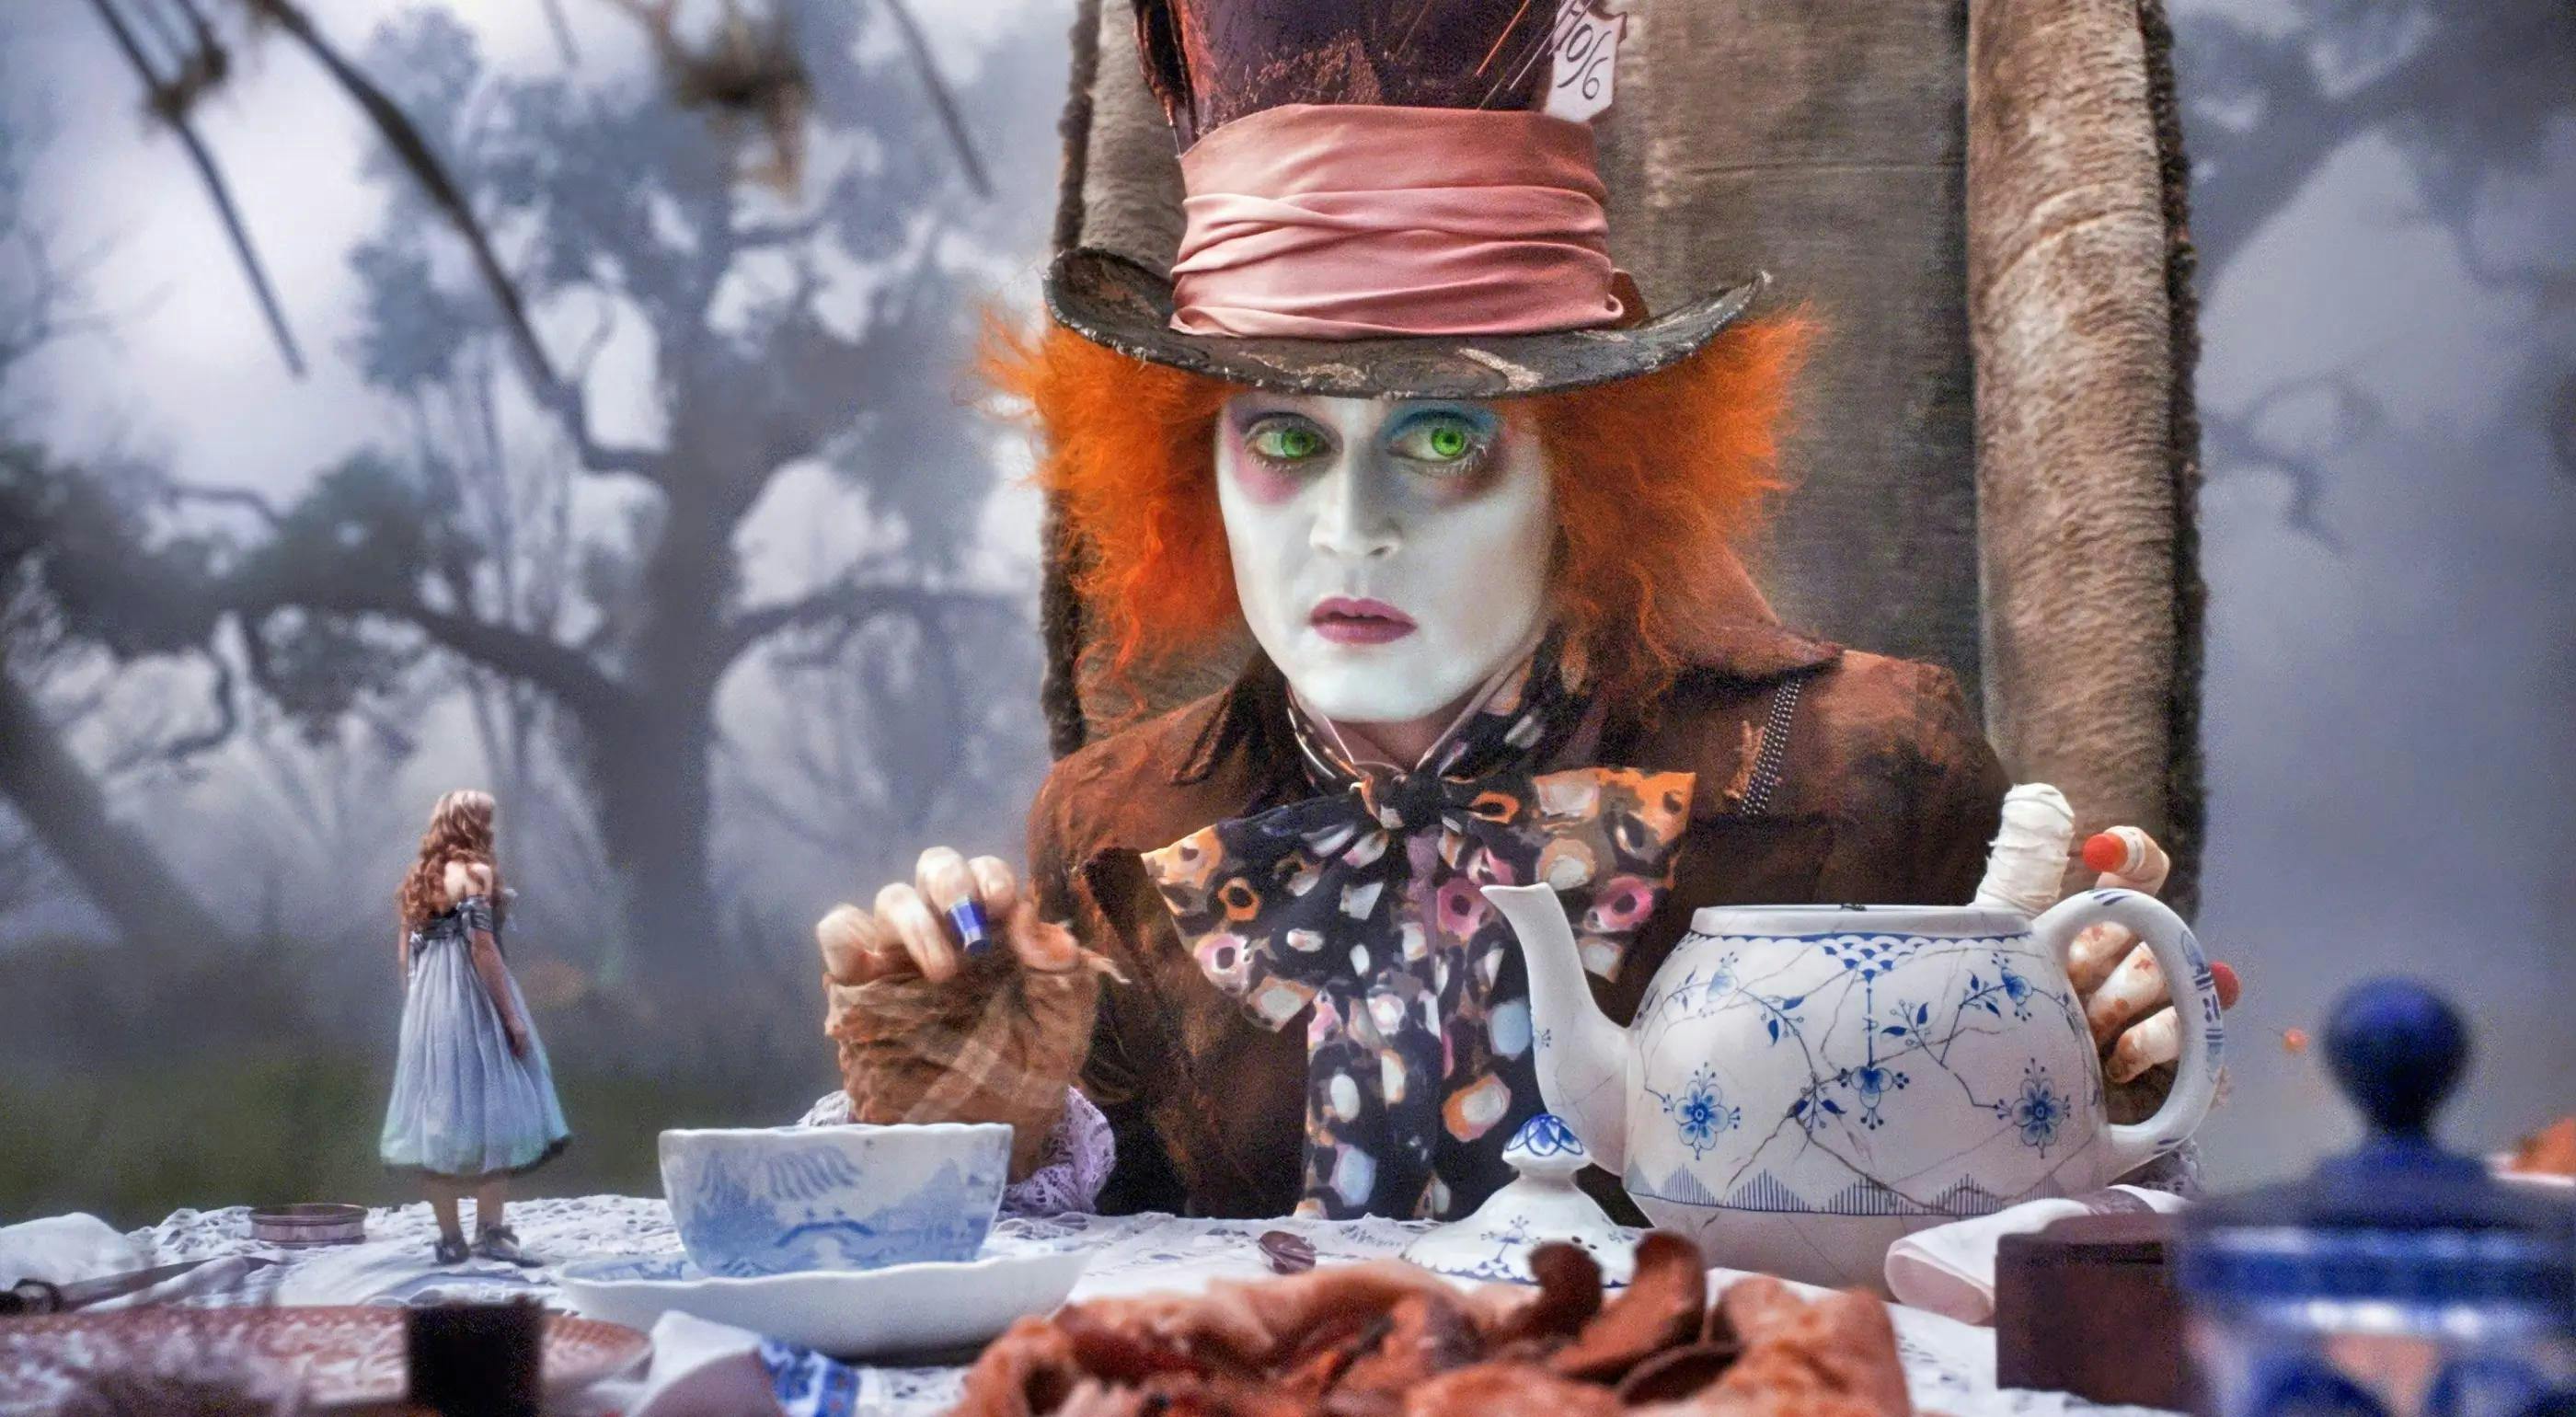 EMFP Personality The Mad Hatter